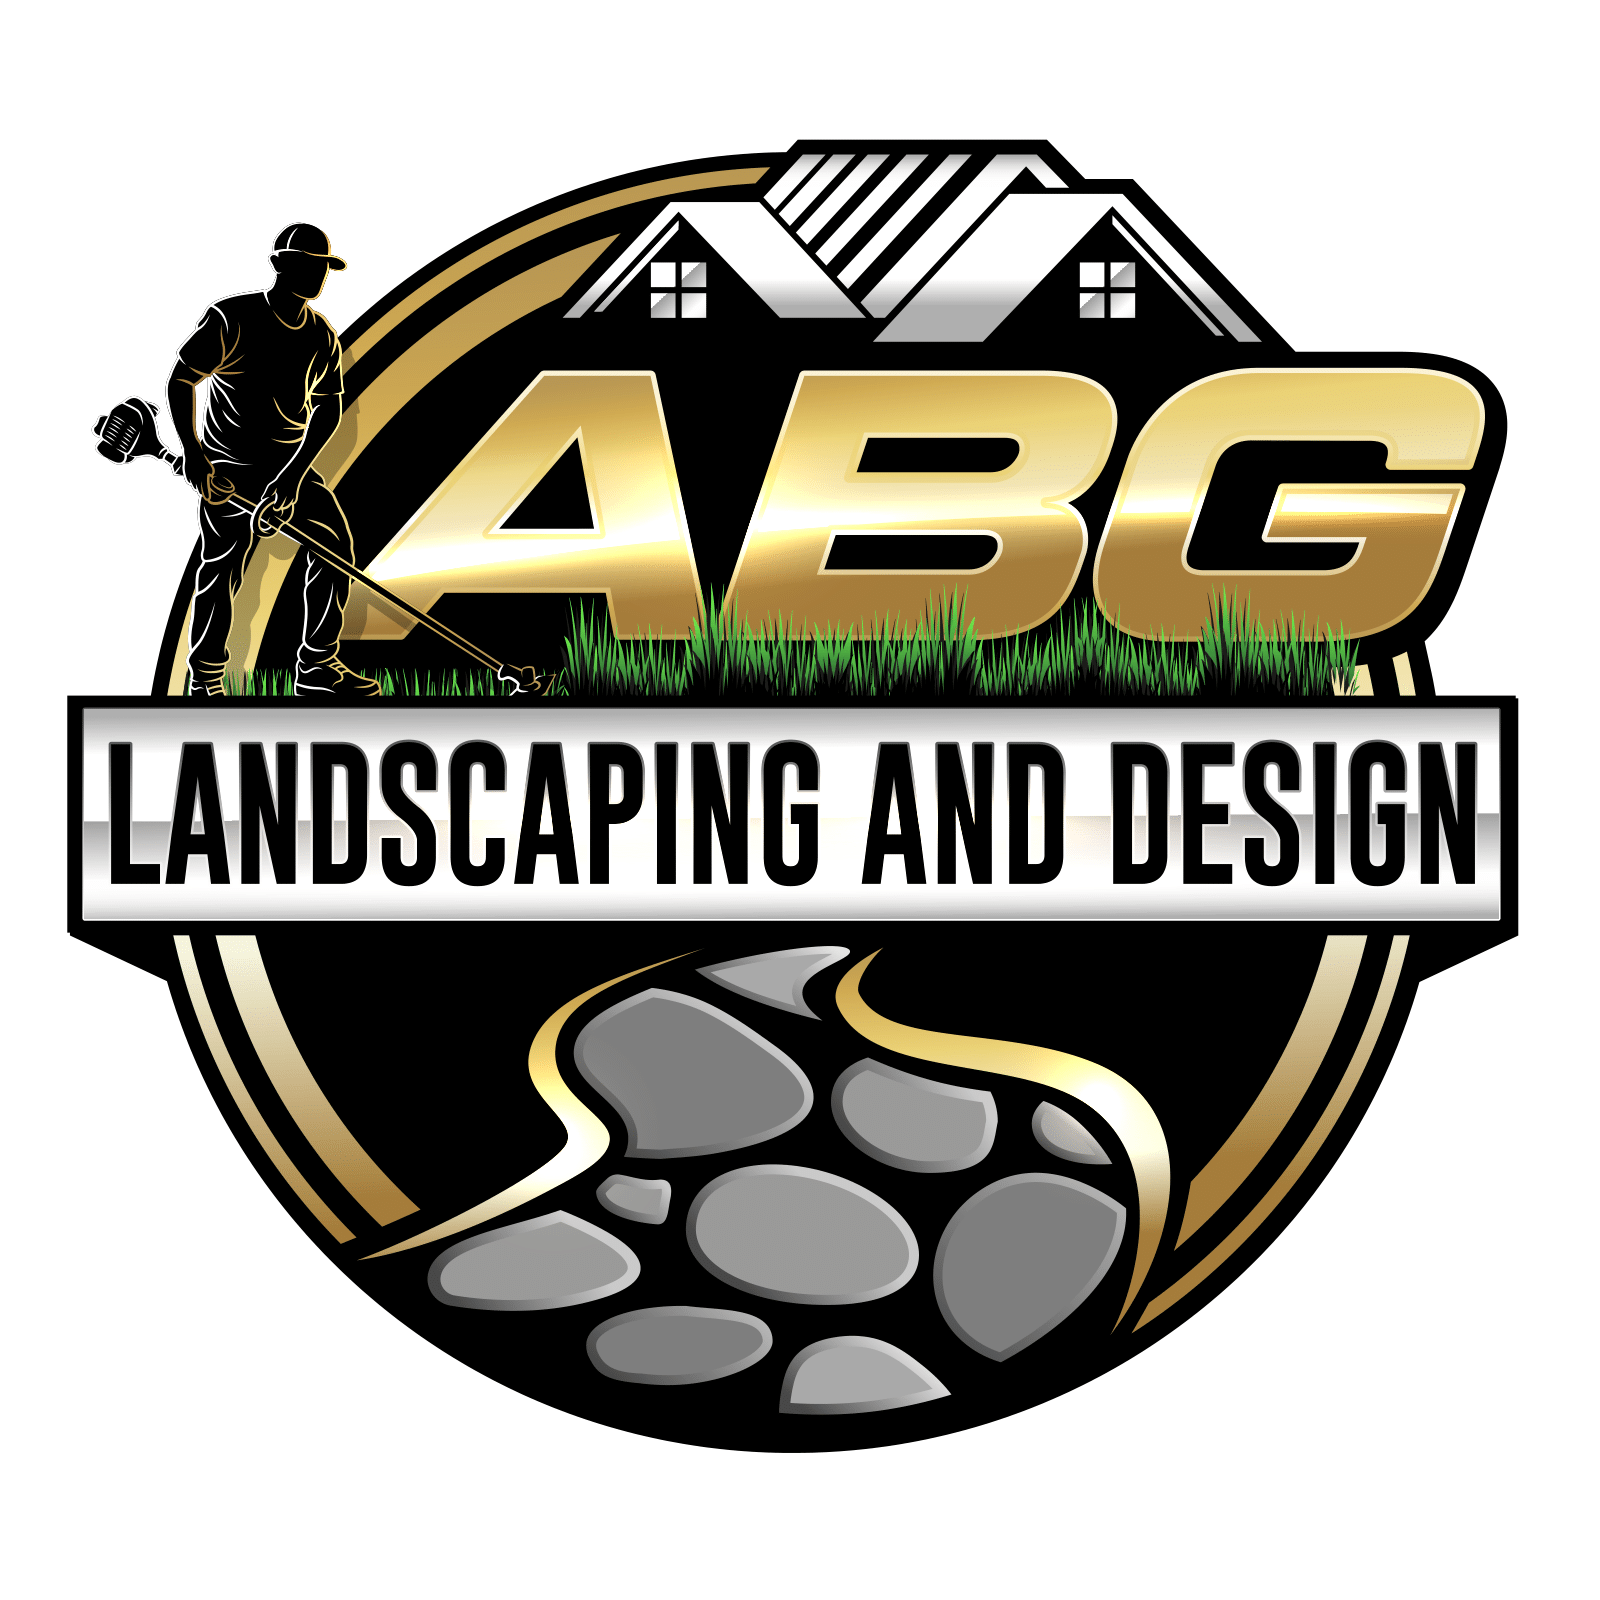 Landscaping And Design